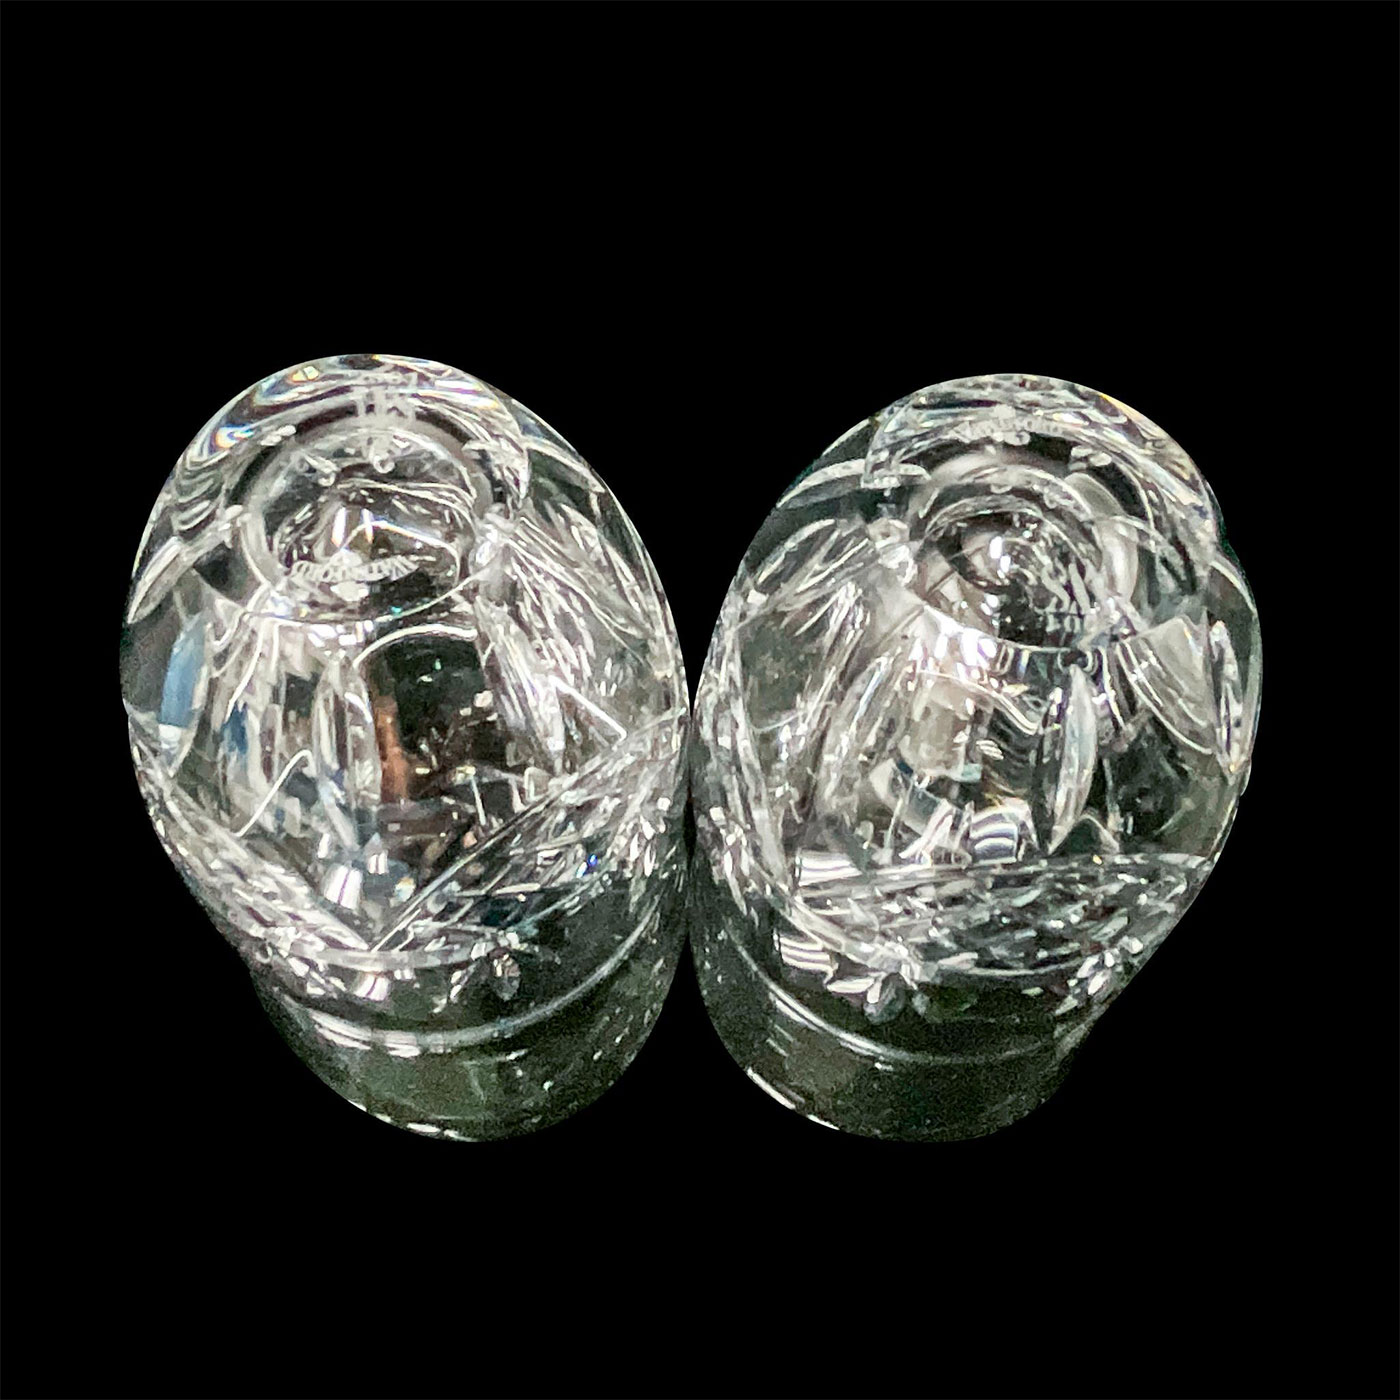 2pc Waterford Crystal Society Patriot Cups - Image 3 of 3